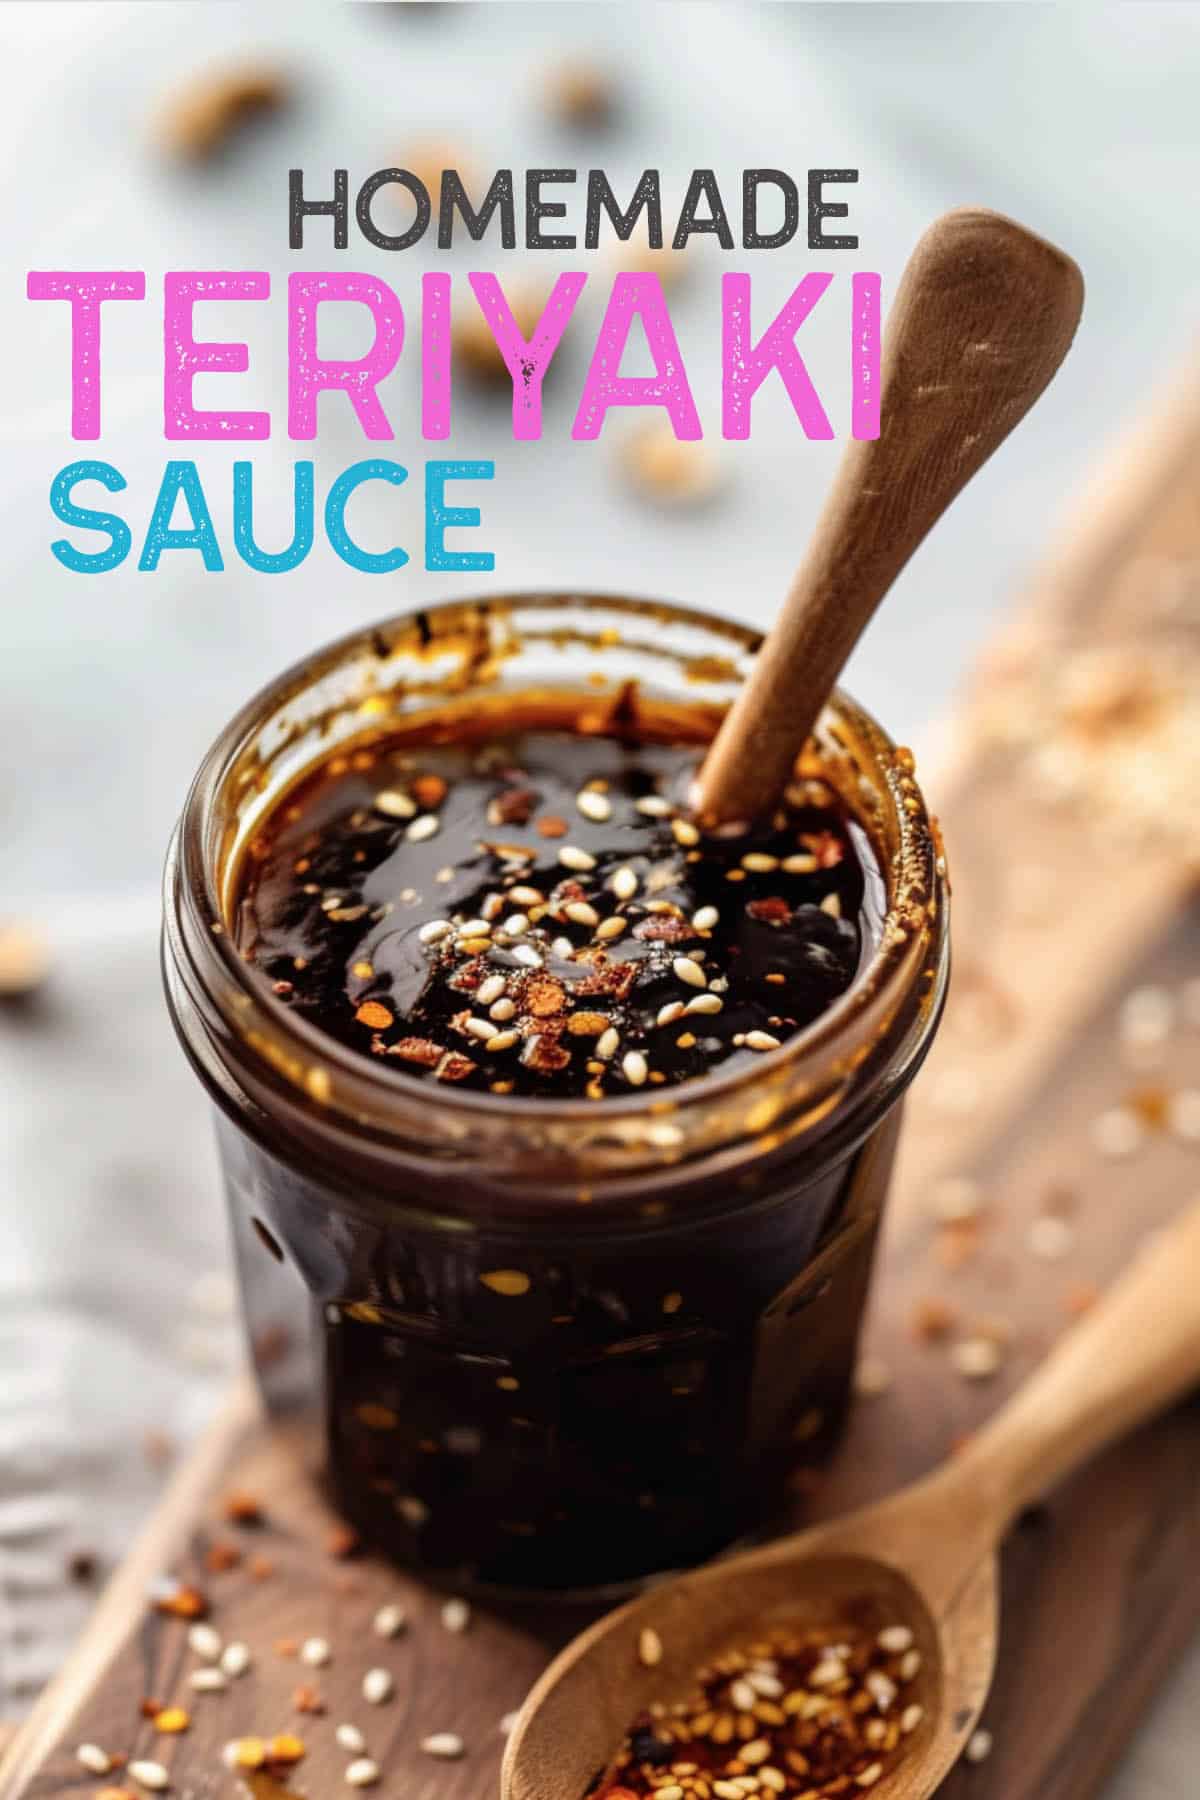 Teriyaki sauce adds a glossy, flavorful coating to the ingredients.